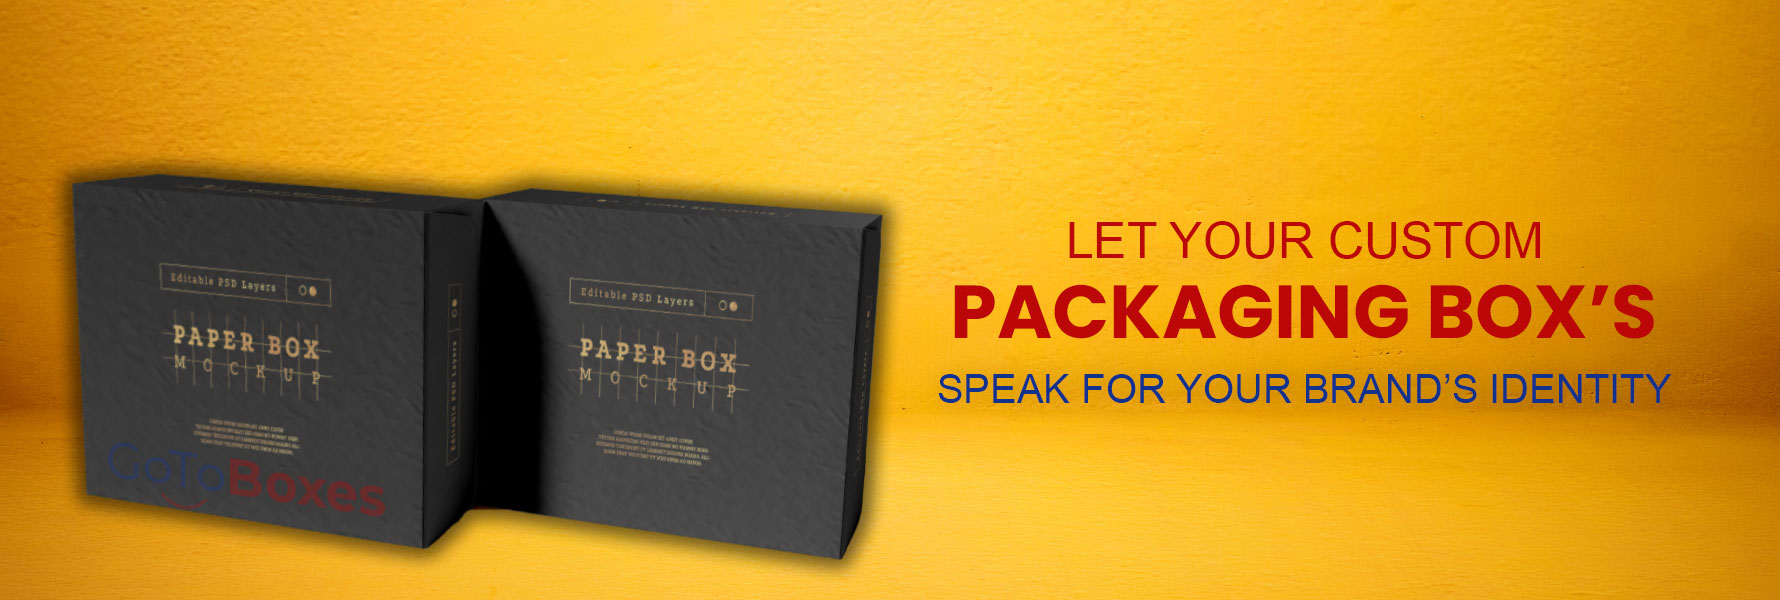 Custom Paper Boxes packaging designs and complete features